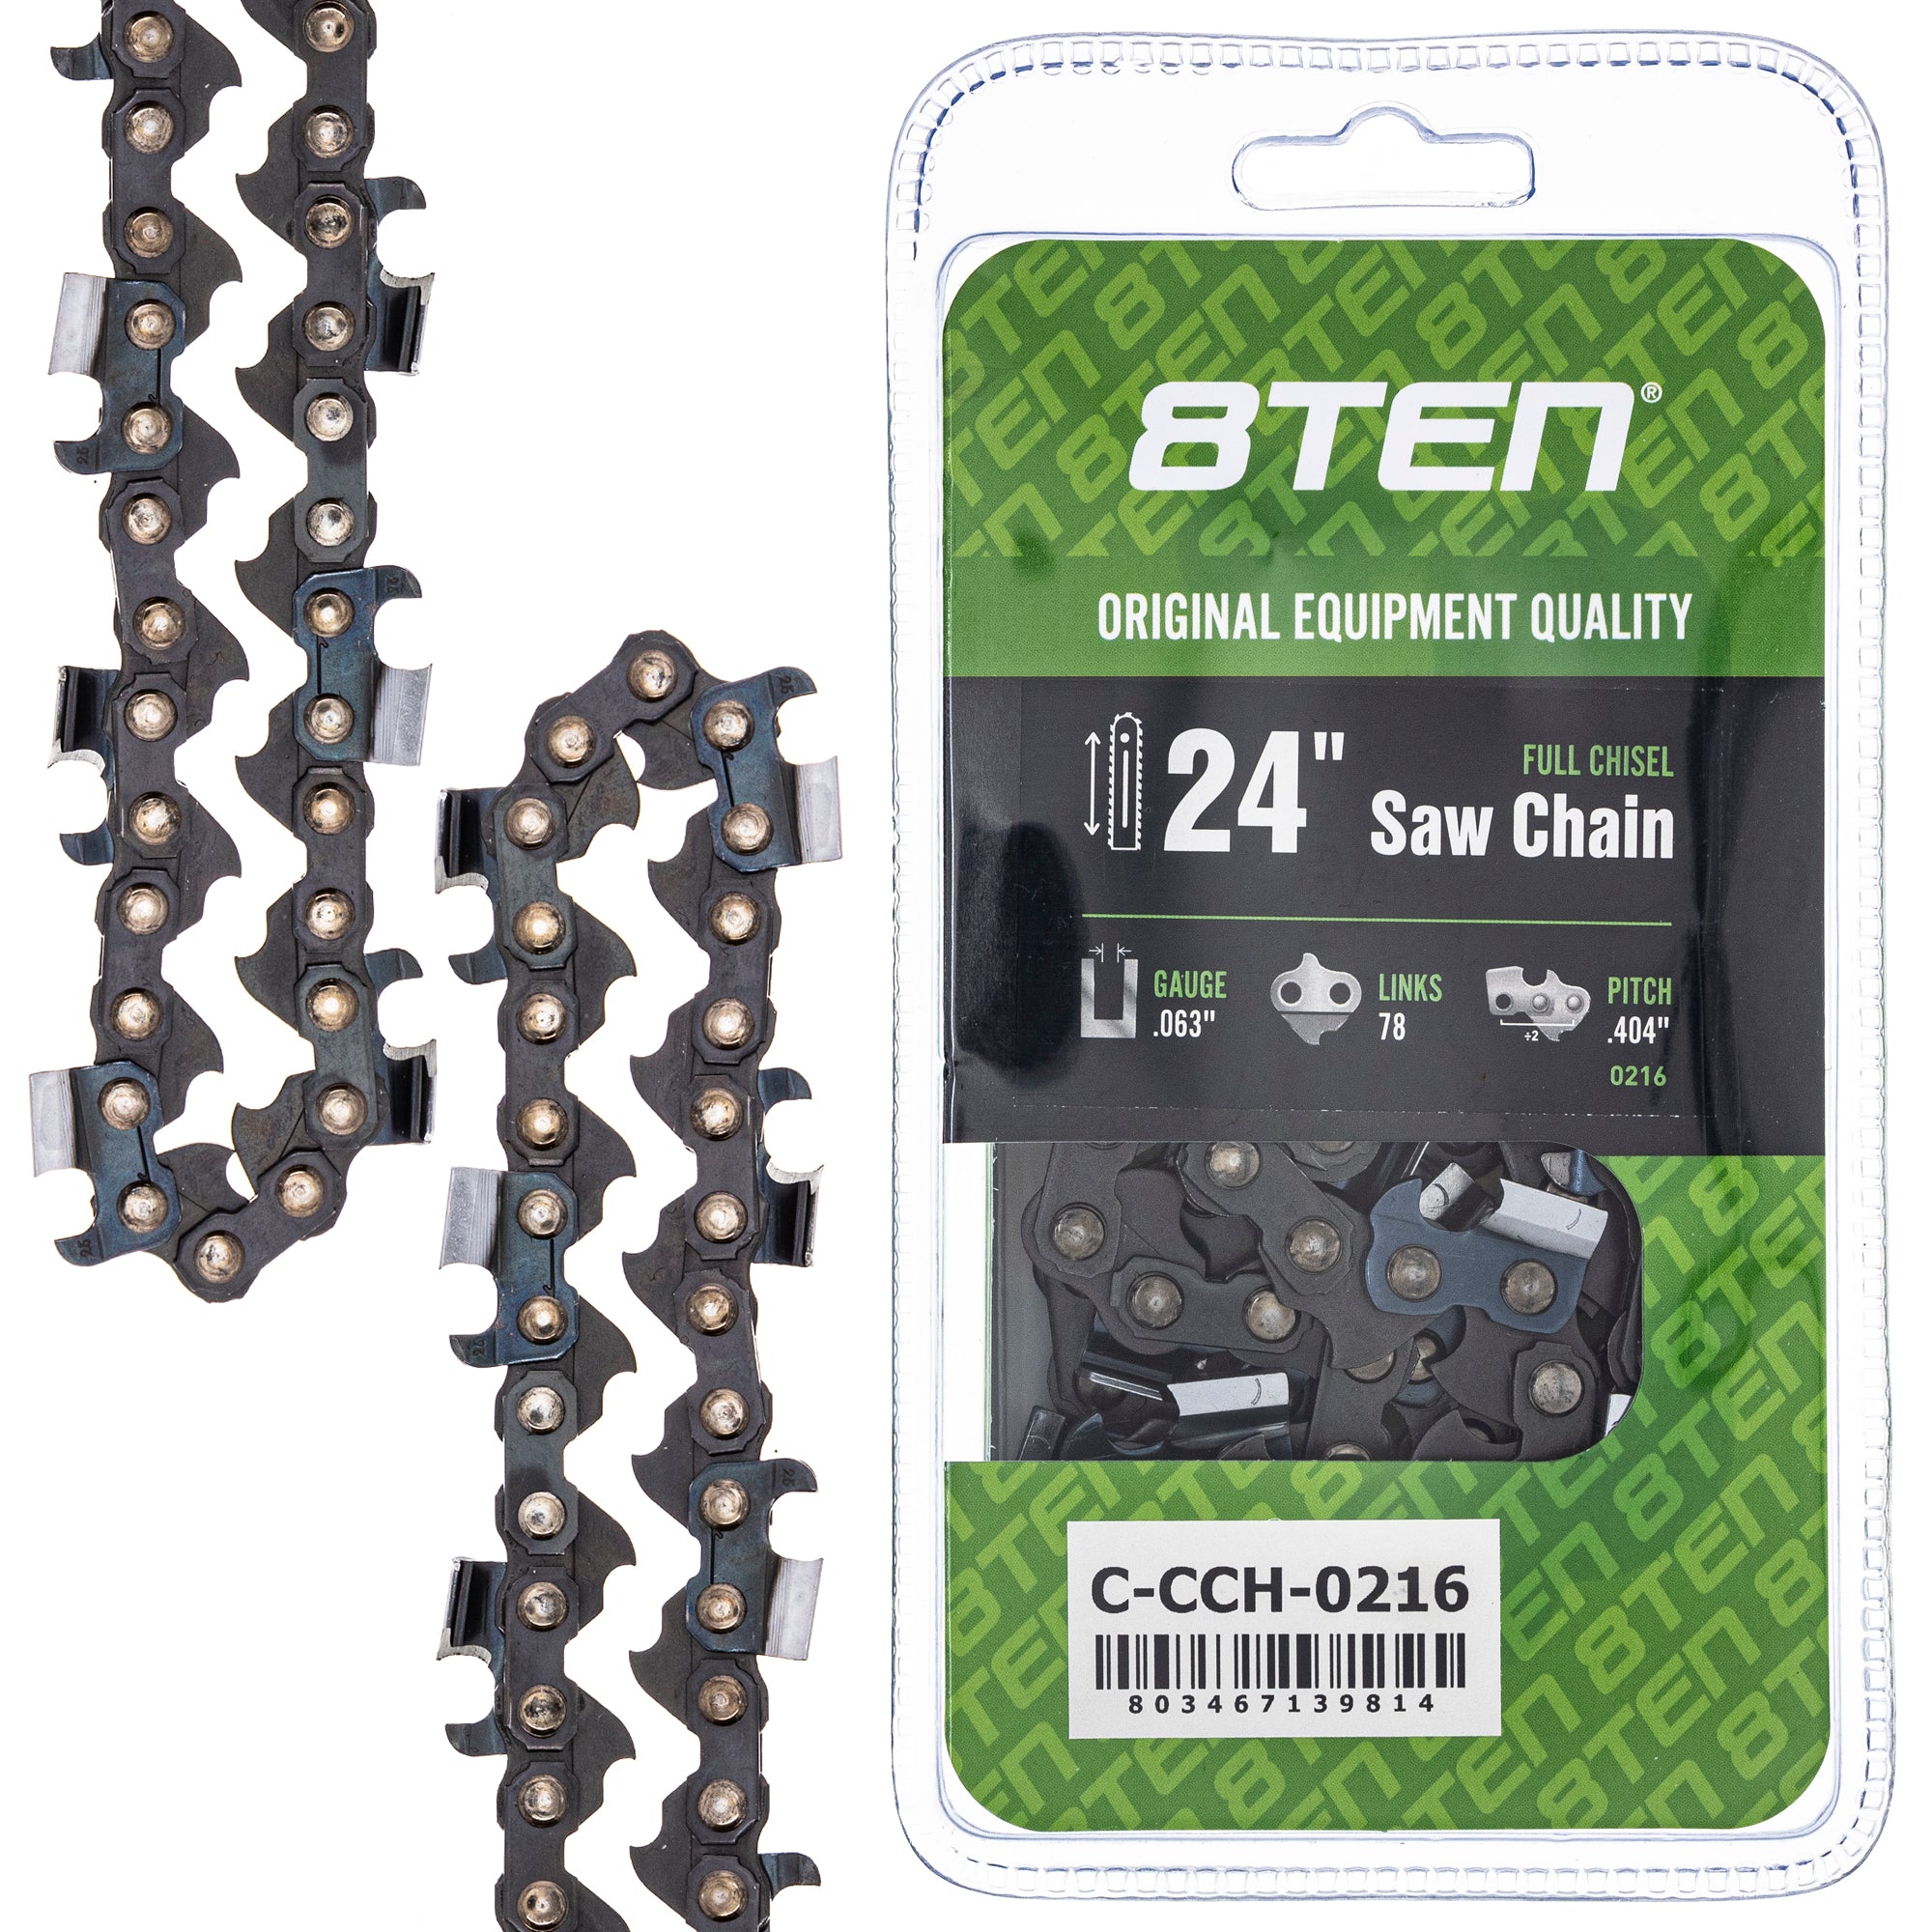 Chainsaw Chain 24 Inch .063 .404 78DL for 8TEN 810-CCC2438H